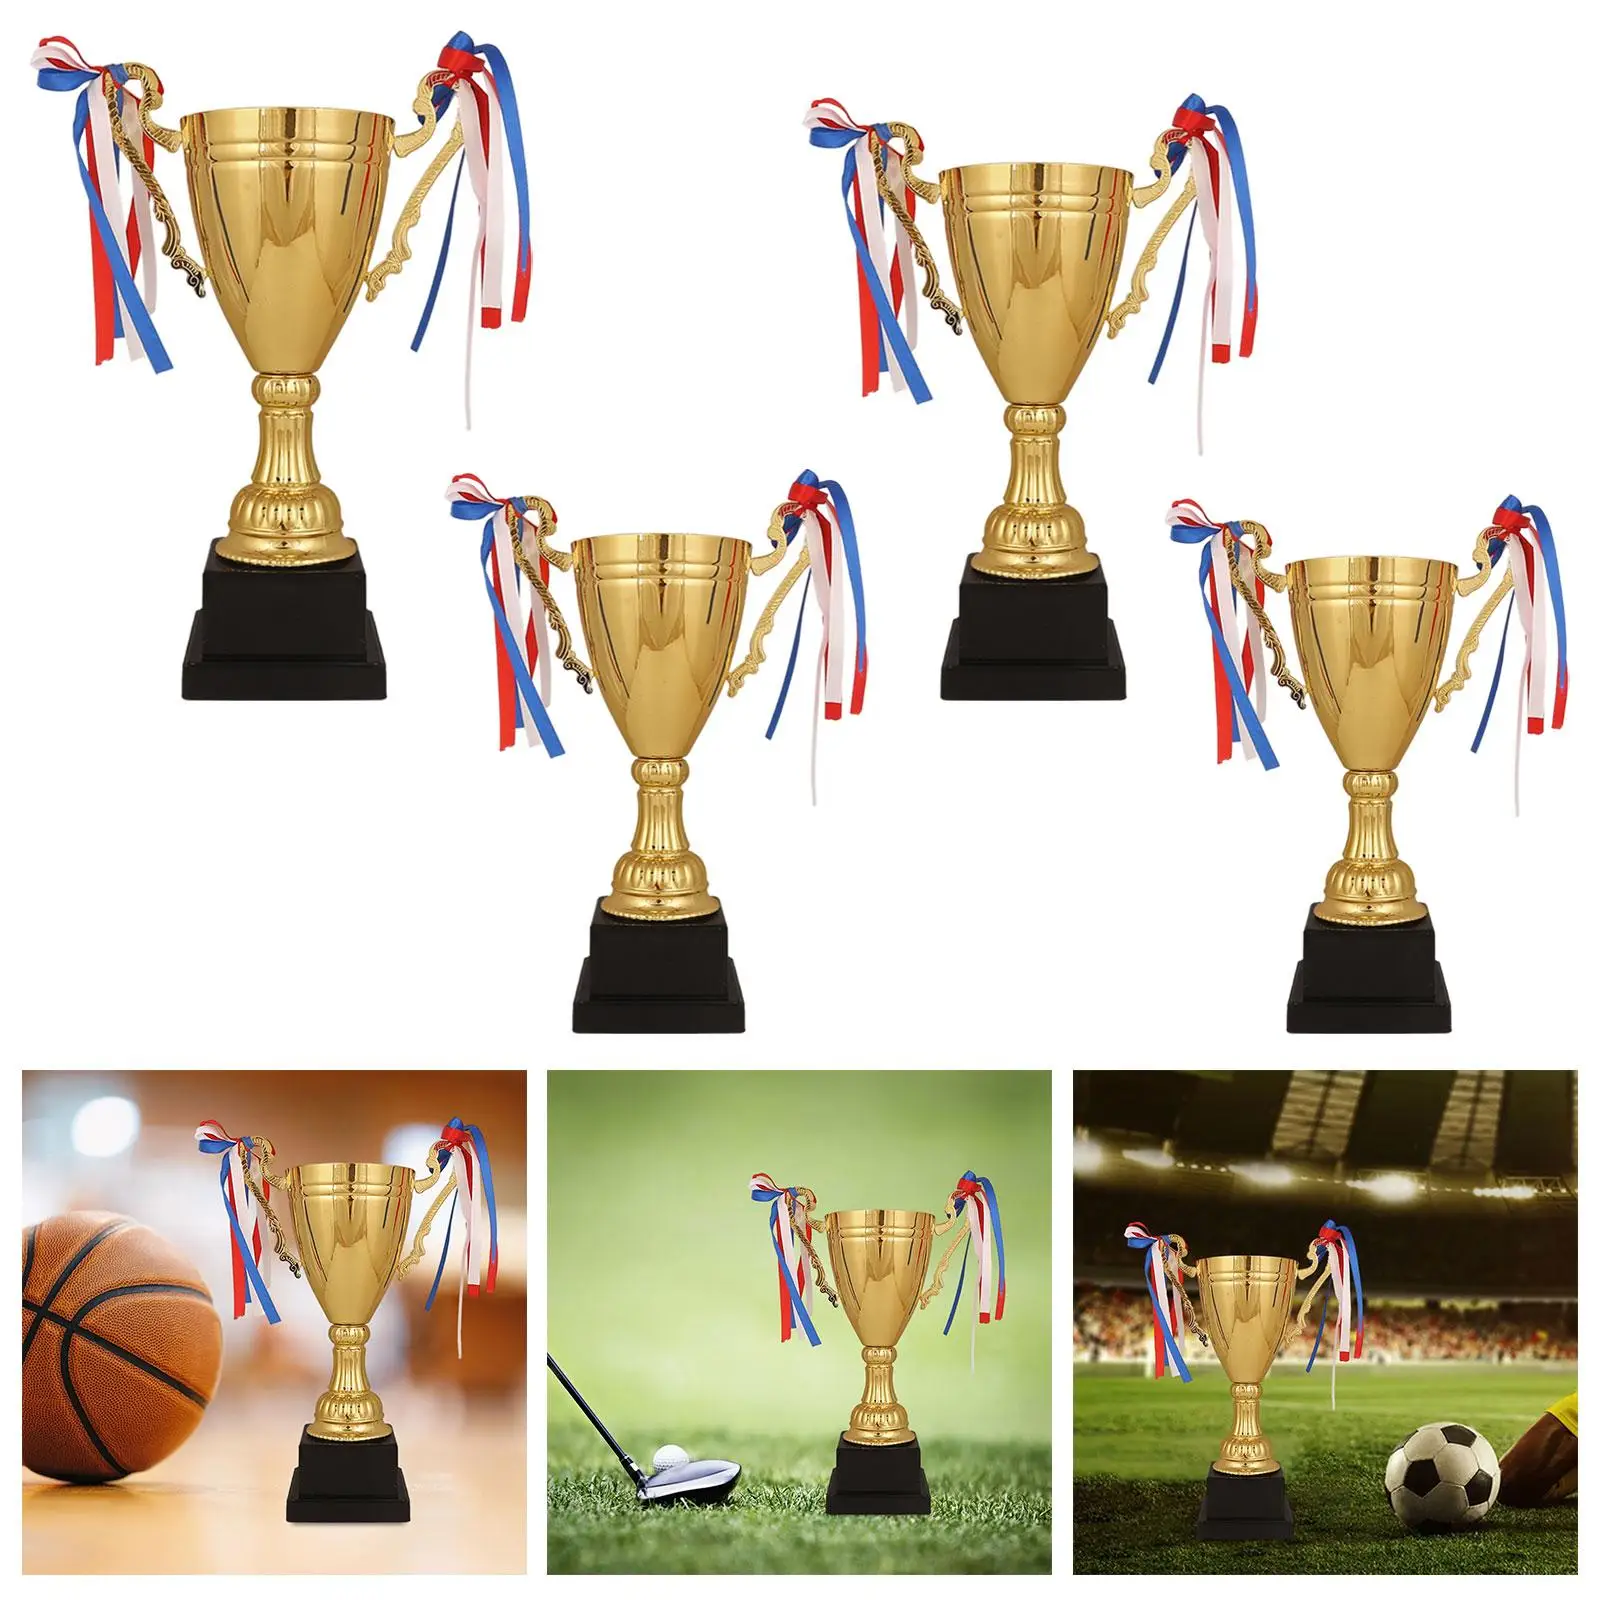 Golden Trophy Cup Large Gold Trophy Cup for Kids Party Football Soccer Sports Championships Teamwork Award Competition Rewarding